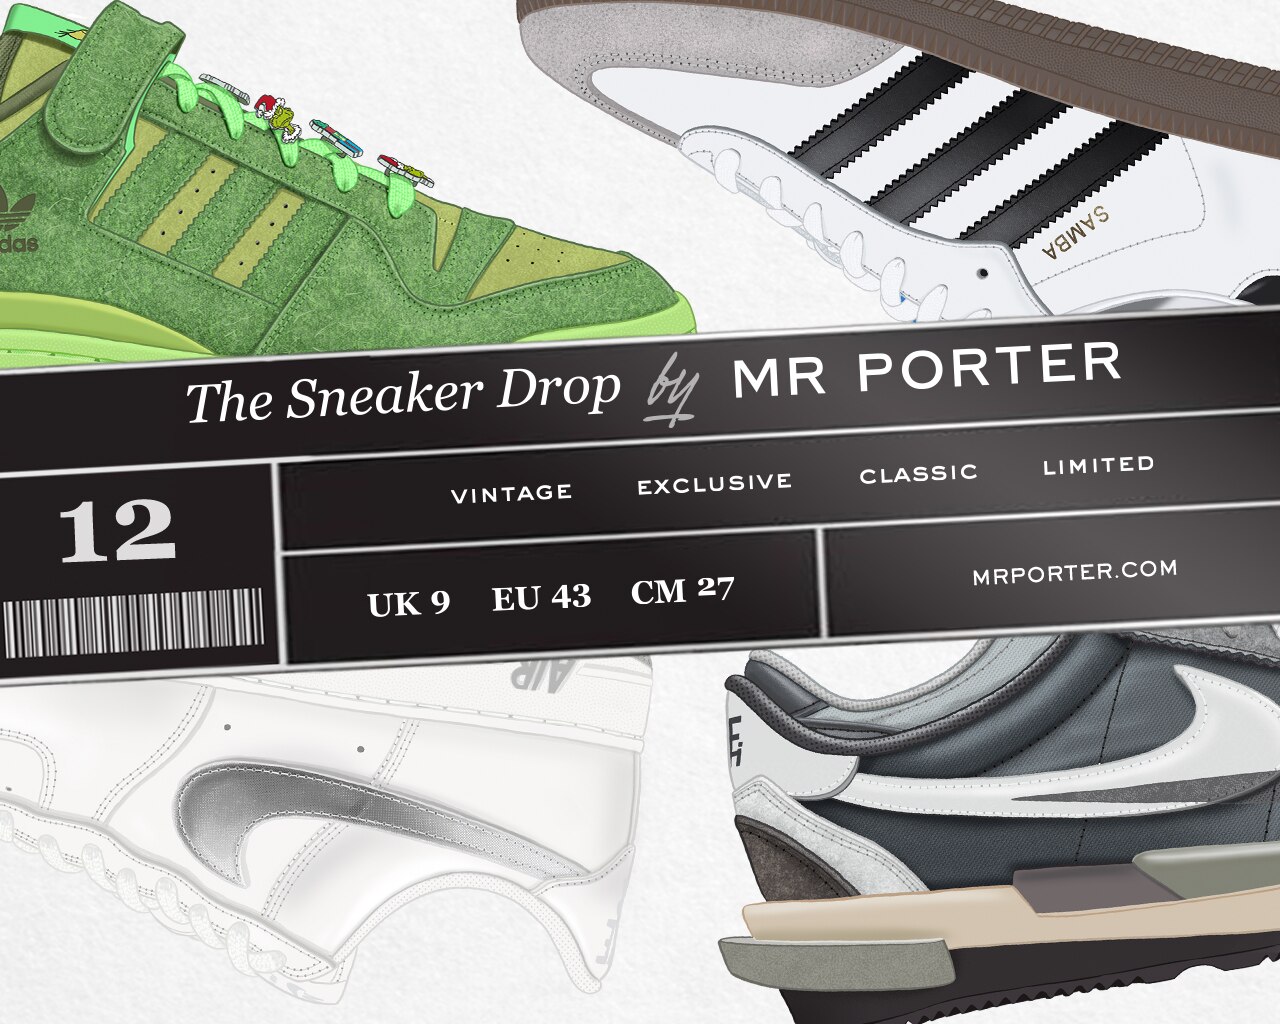 Generalize Sermon definite Fashion: The Sneaker Drop – December's Big Releases From Nike And Adidas |  The Journal | MR PORTER